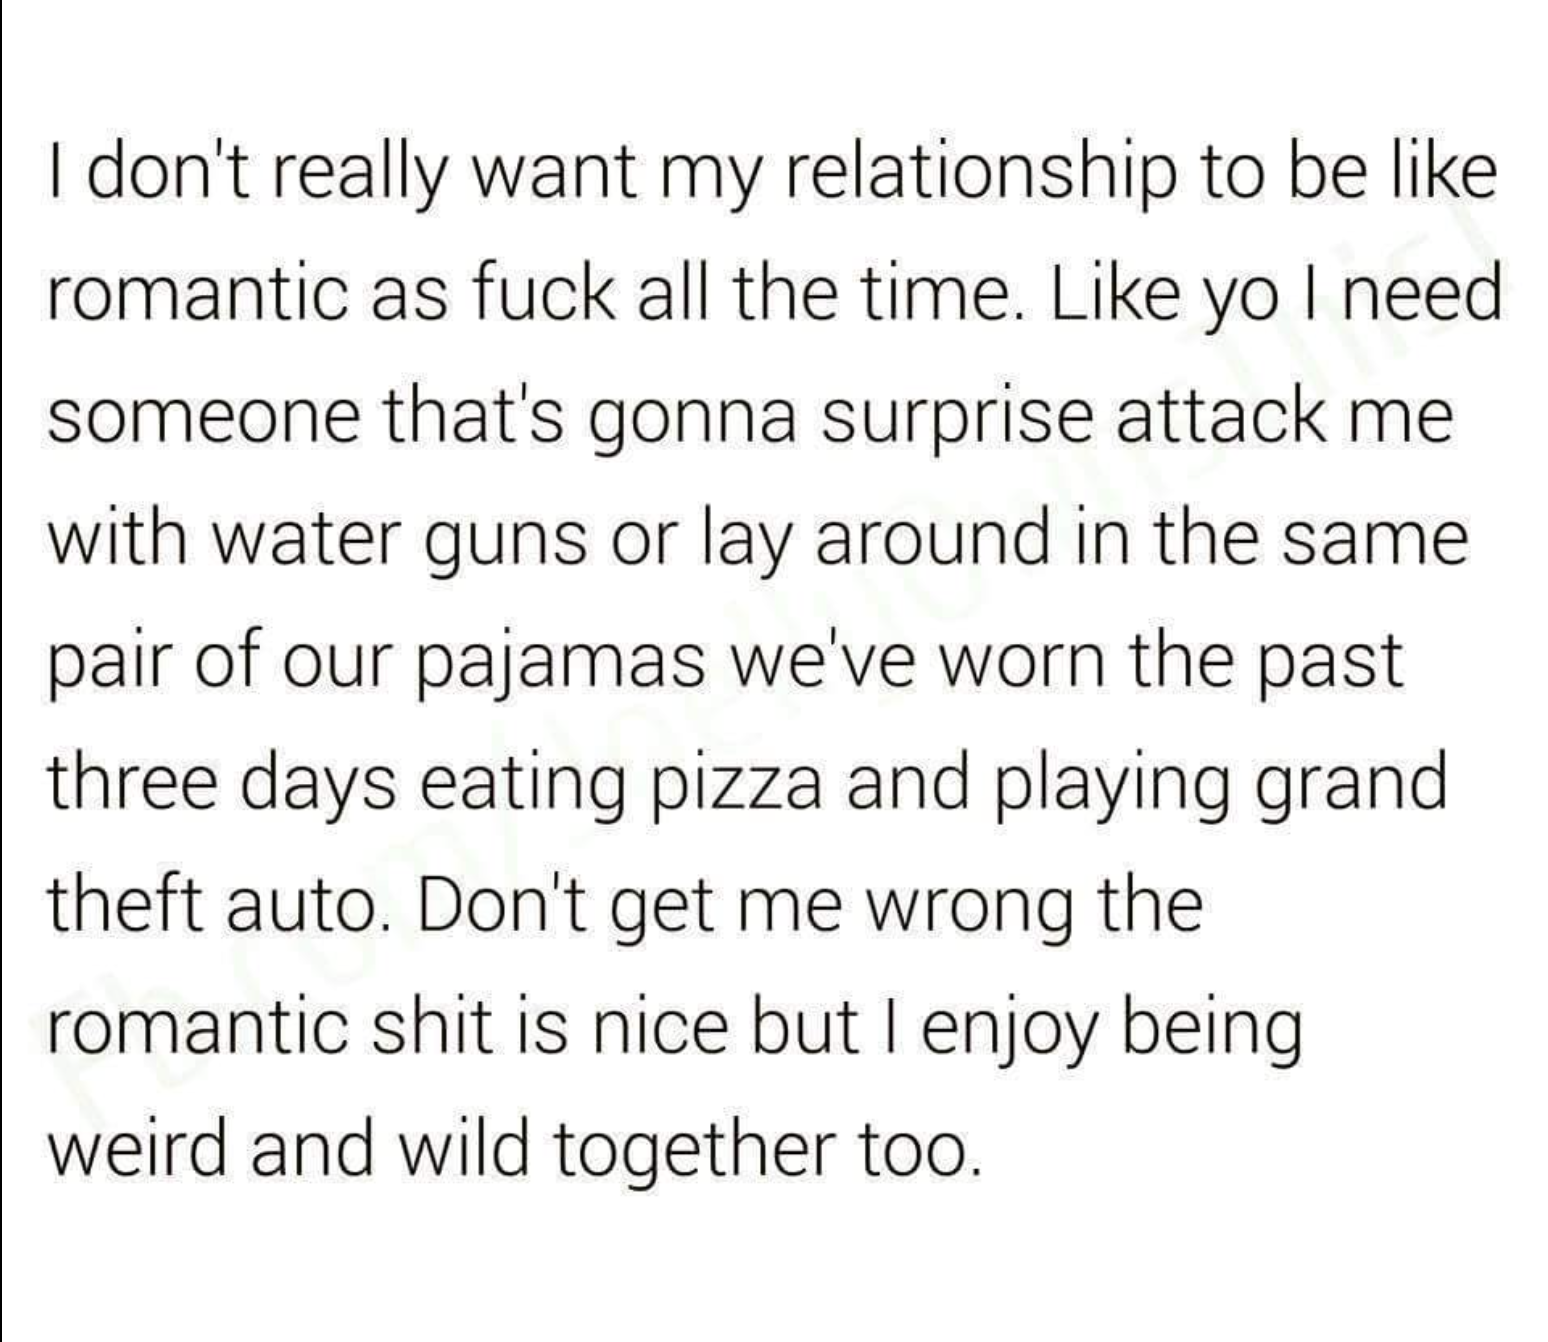 handwriting - I don't really want my relationship to be romantic as fuck all the time. yo I need someone that's gonna surprise attack me with water guns or lay around in the same pair of our pajamas we've worn the past three days eating pizza and playing 